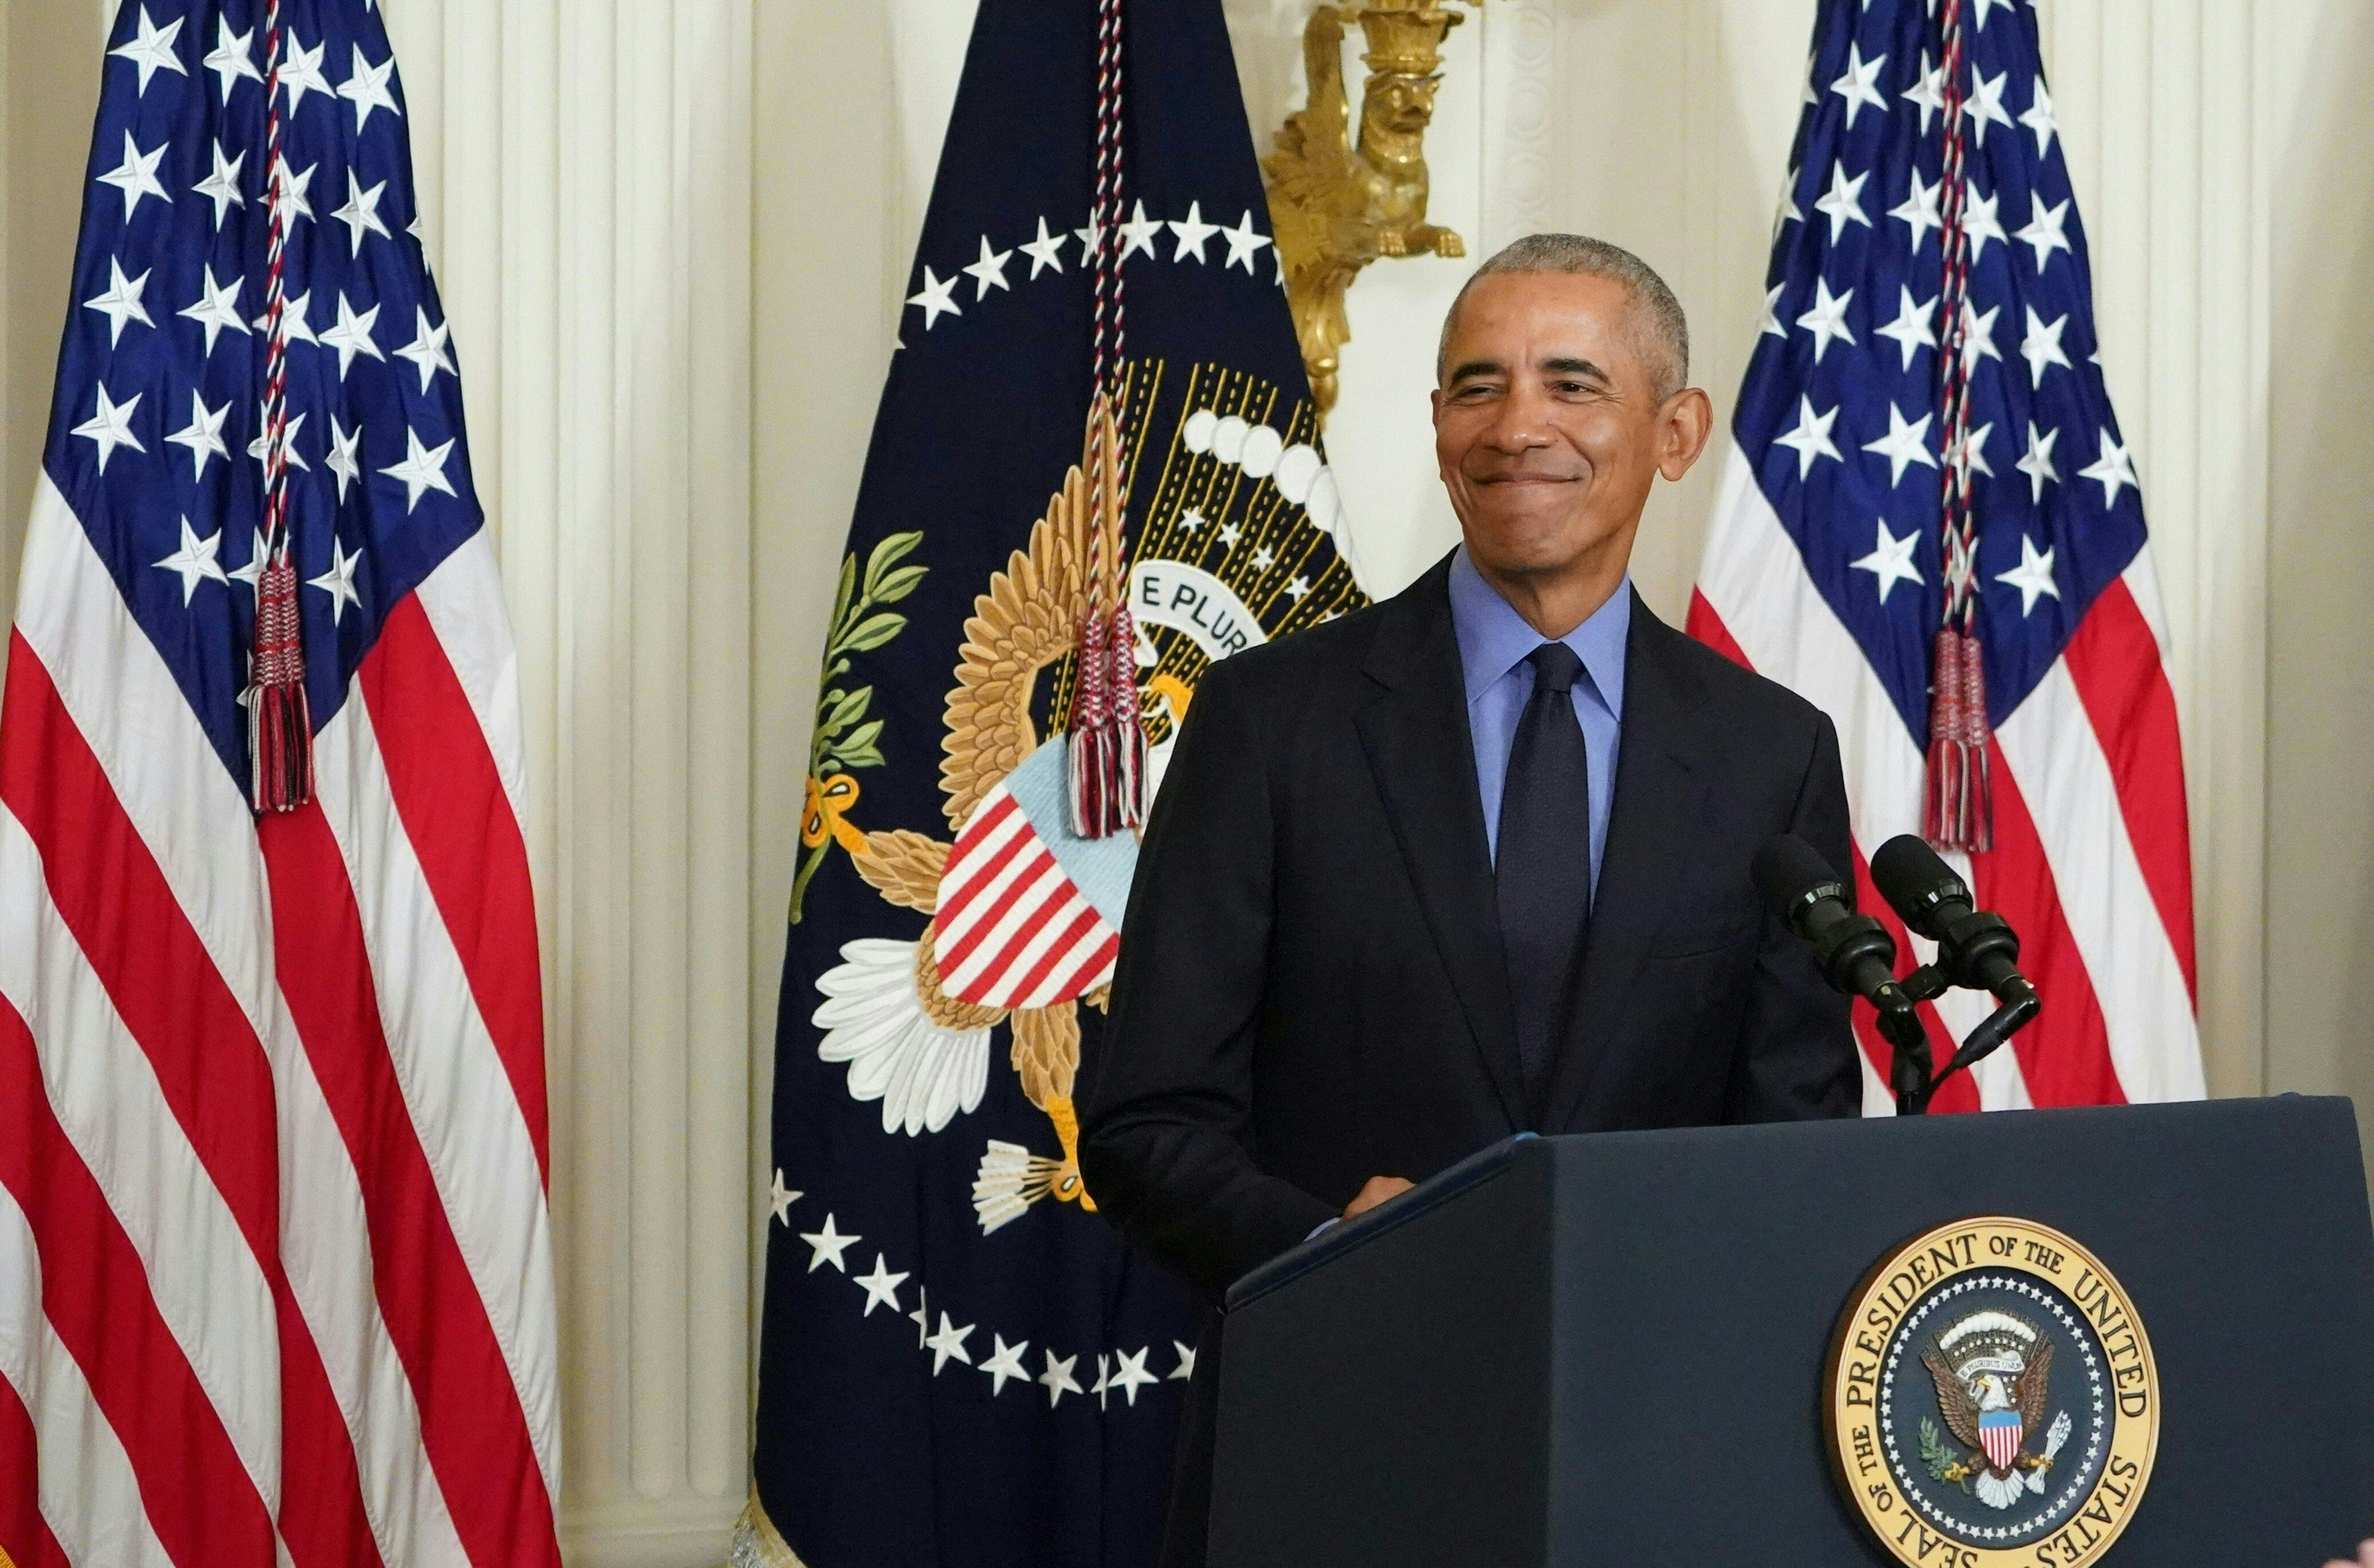 Airbnb CEO and Obama announce US$100M scholarship